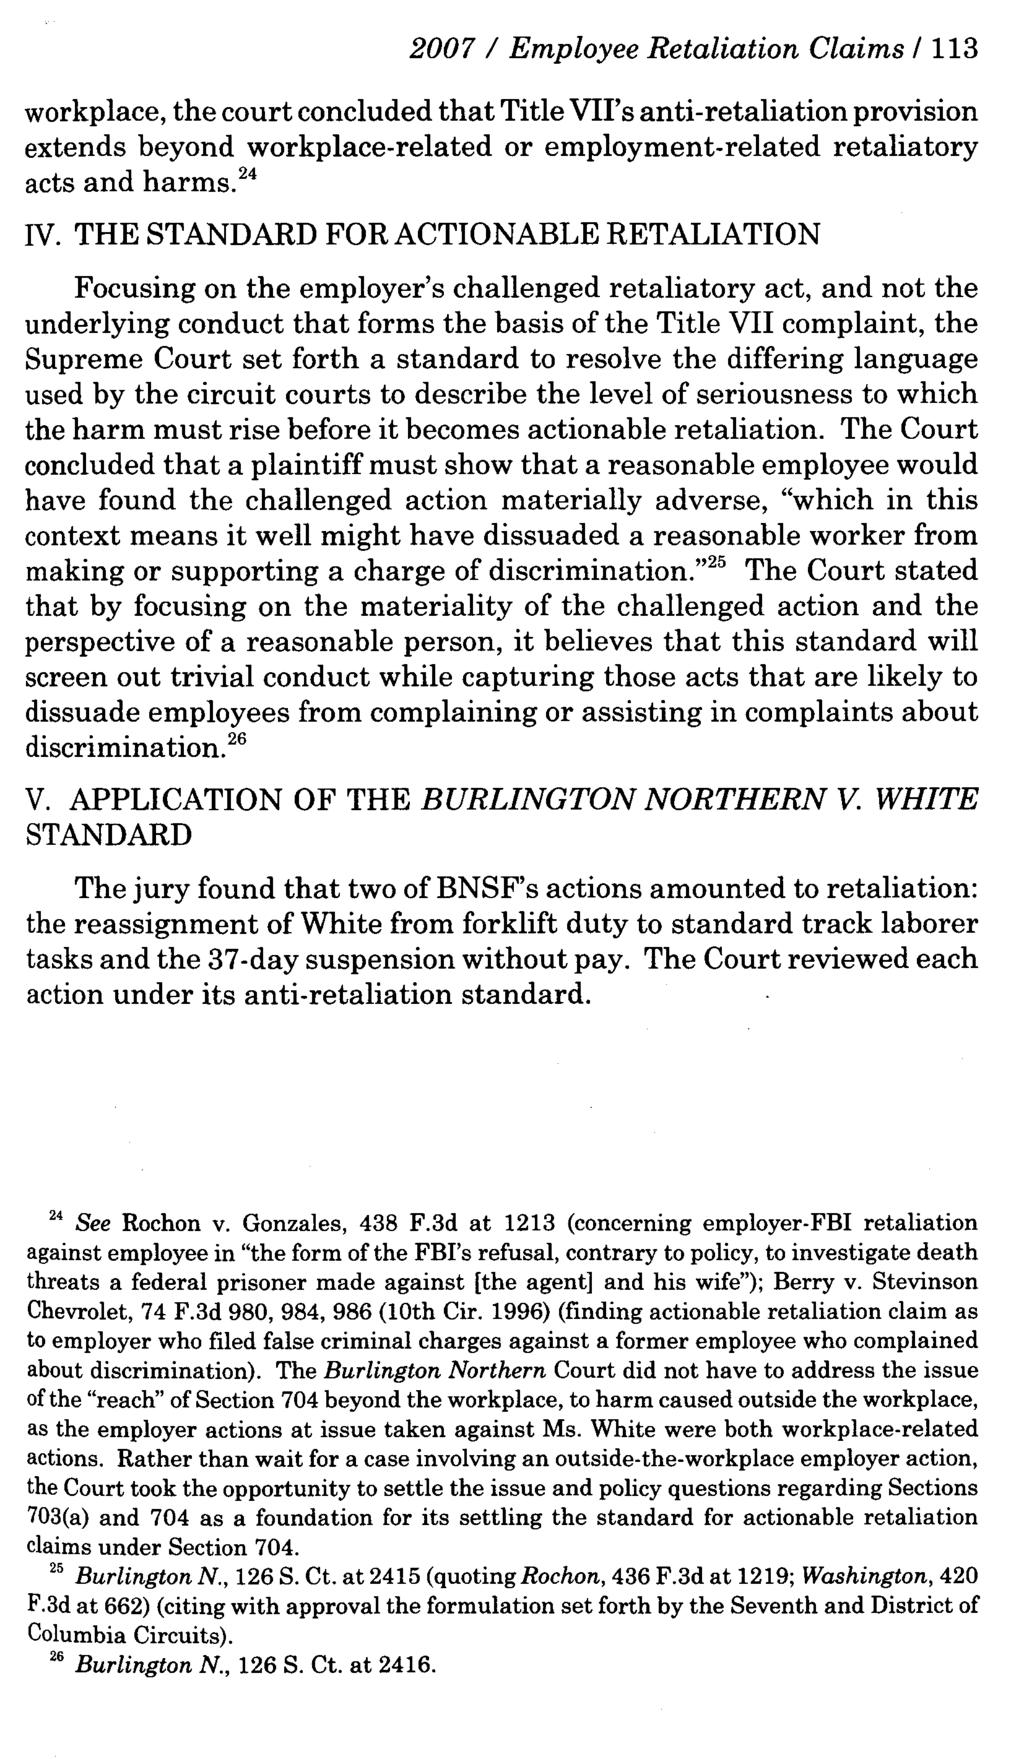 2007 / Employee Retaliation Claims /113 workplace, the court concluded that Title VII's anti-retaliation provision extends beyond workplace-related or employment-related retaliatory acts and harms.